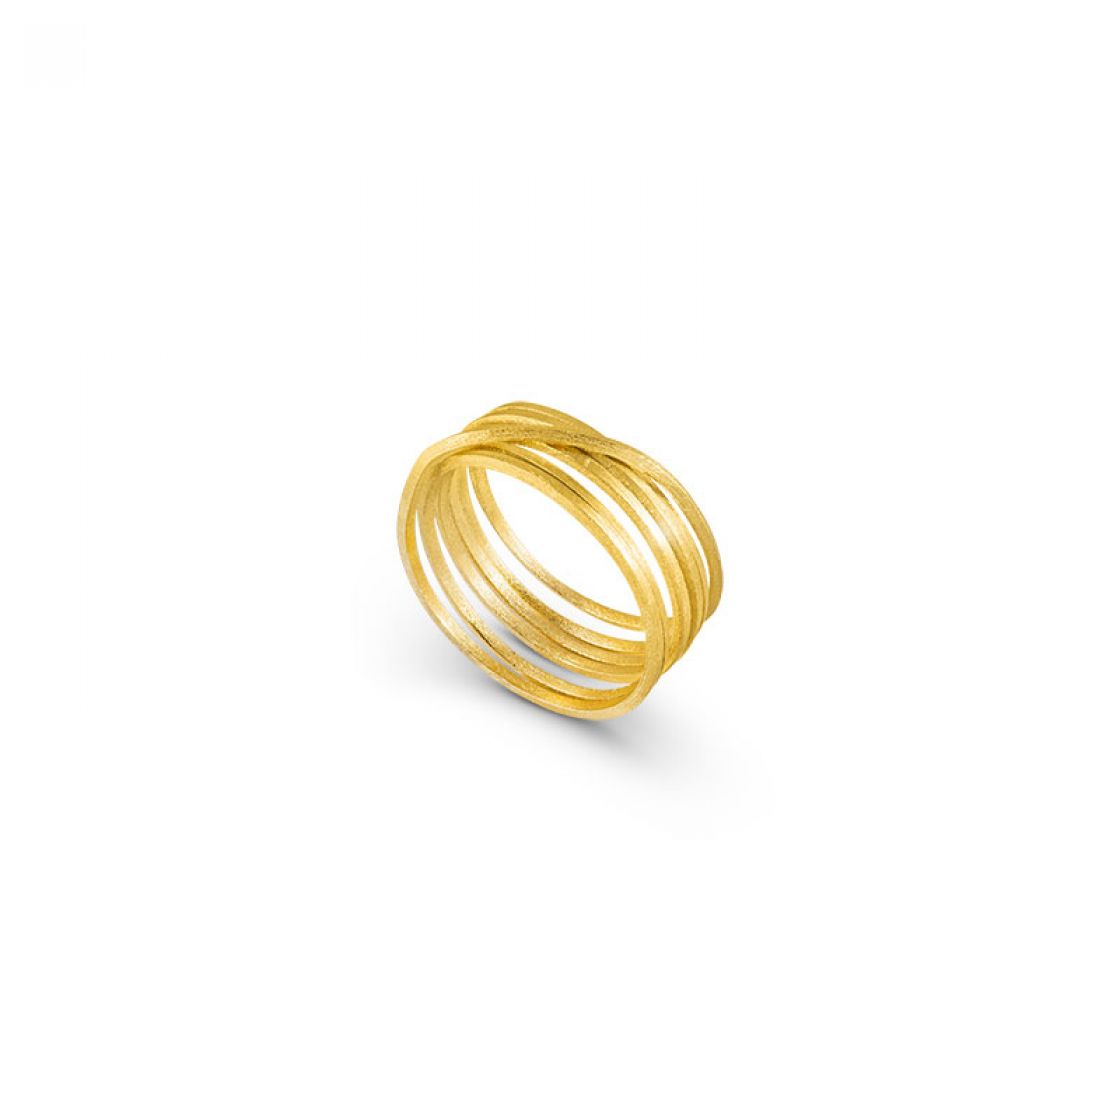 Delicate gold coil ring with a gentle satin finish.